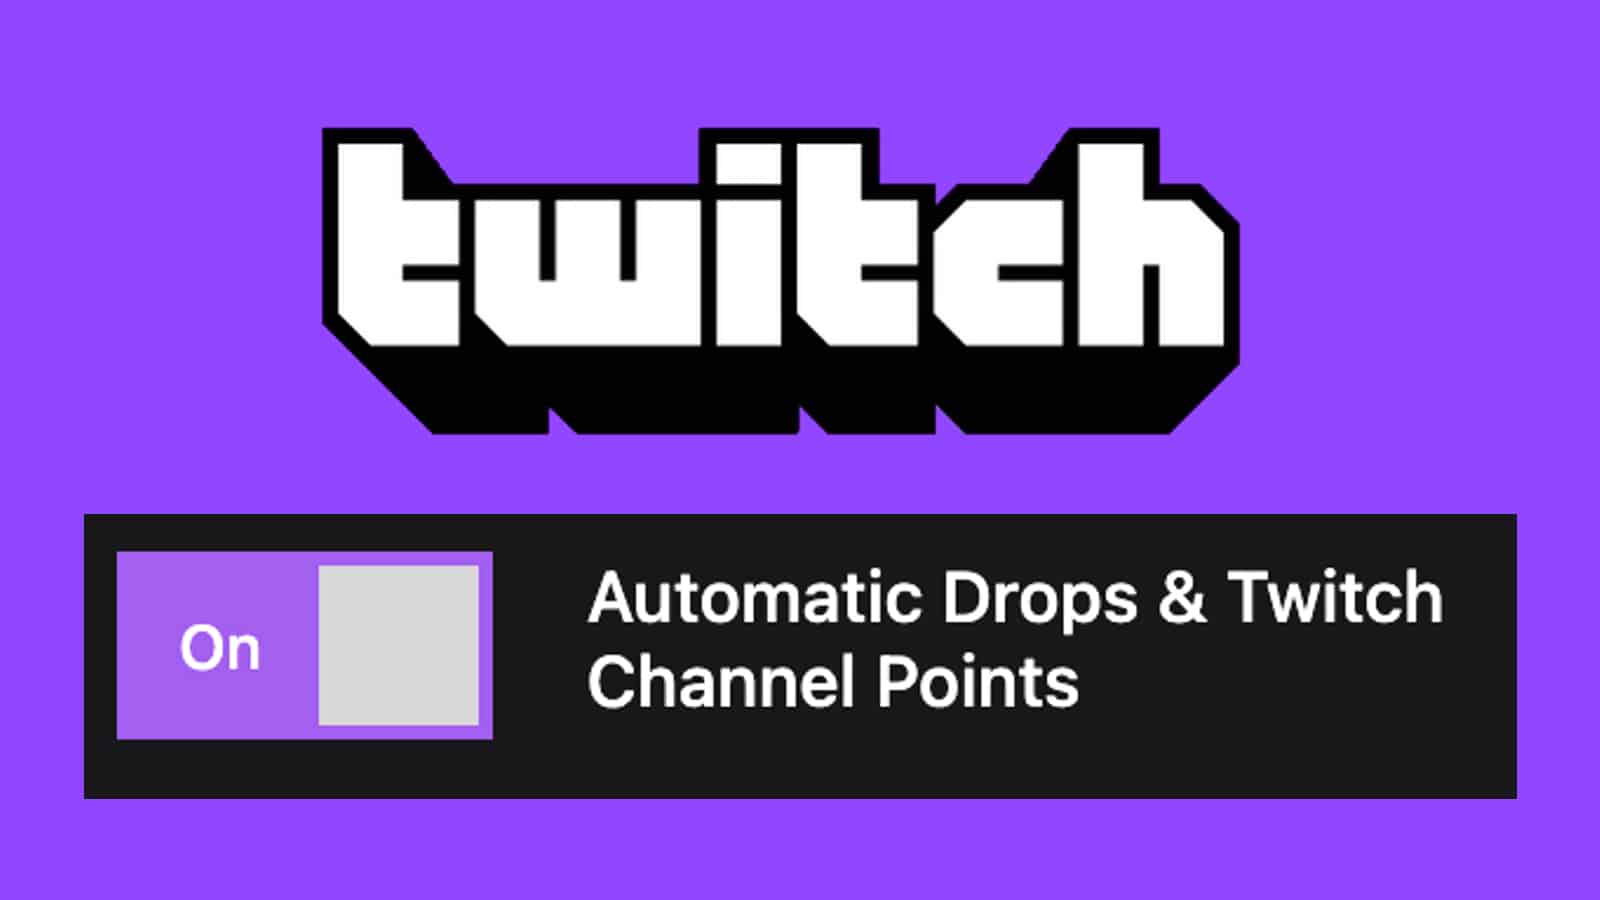 Automatic Twitch: Drops, Moments and Points